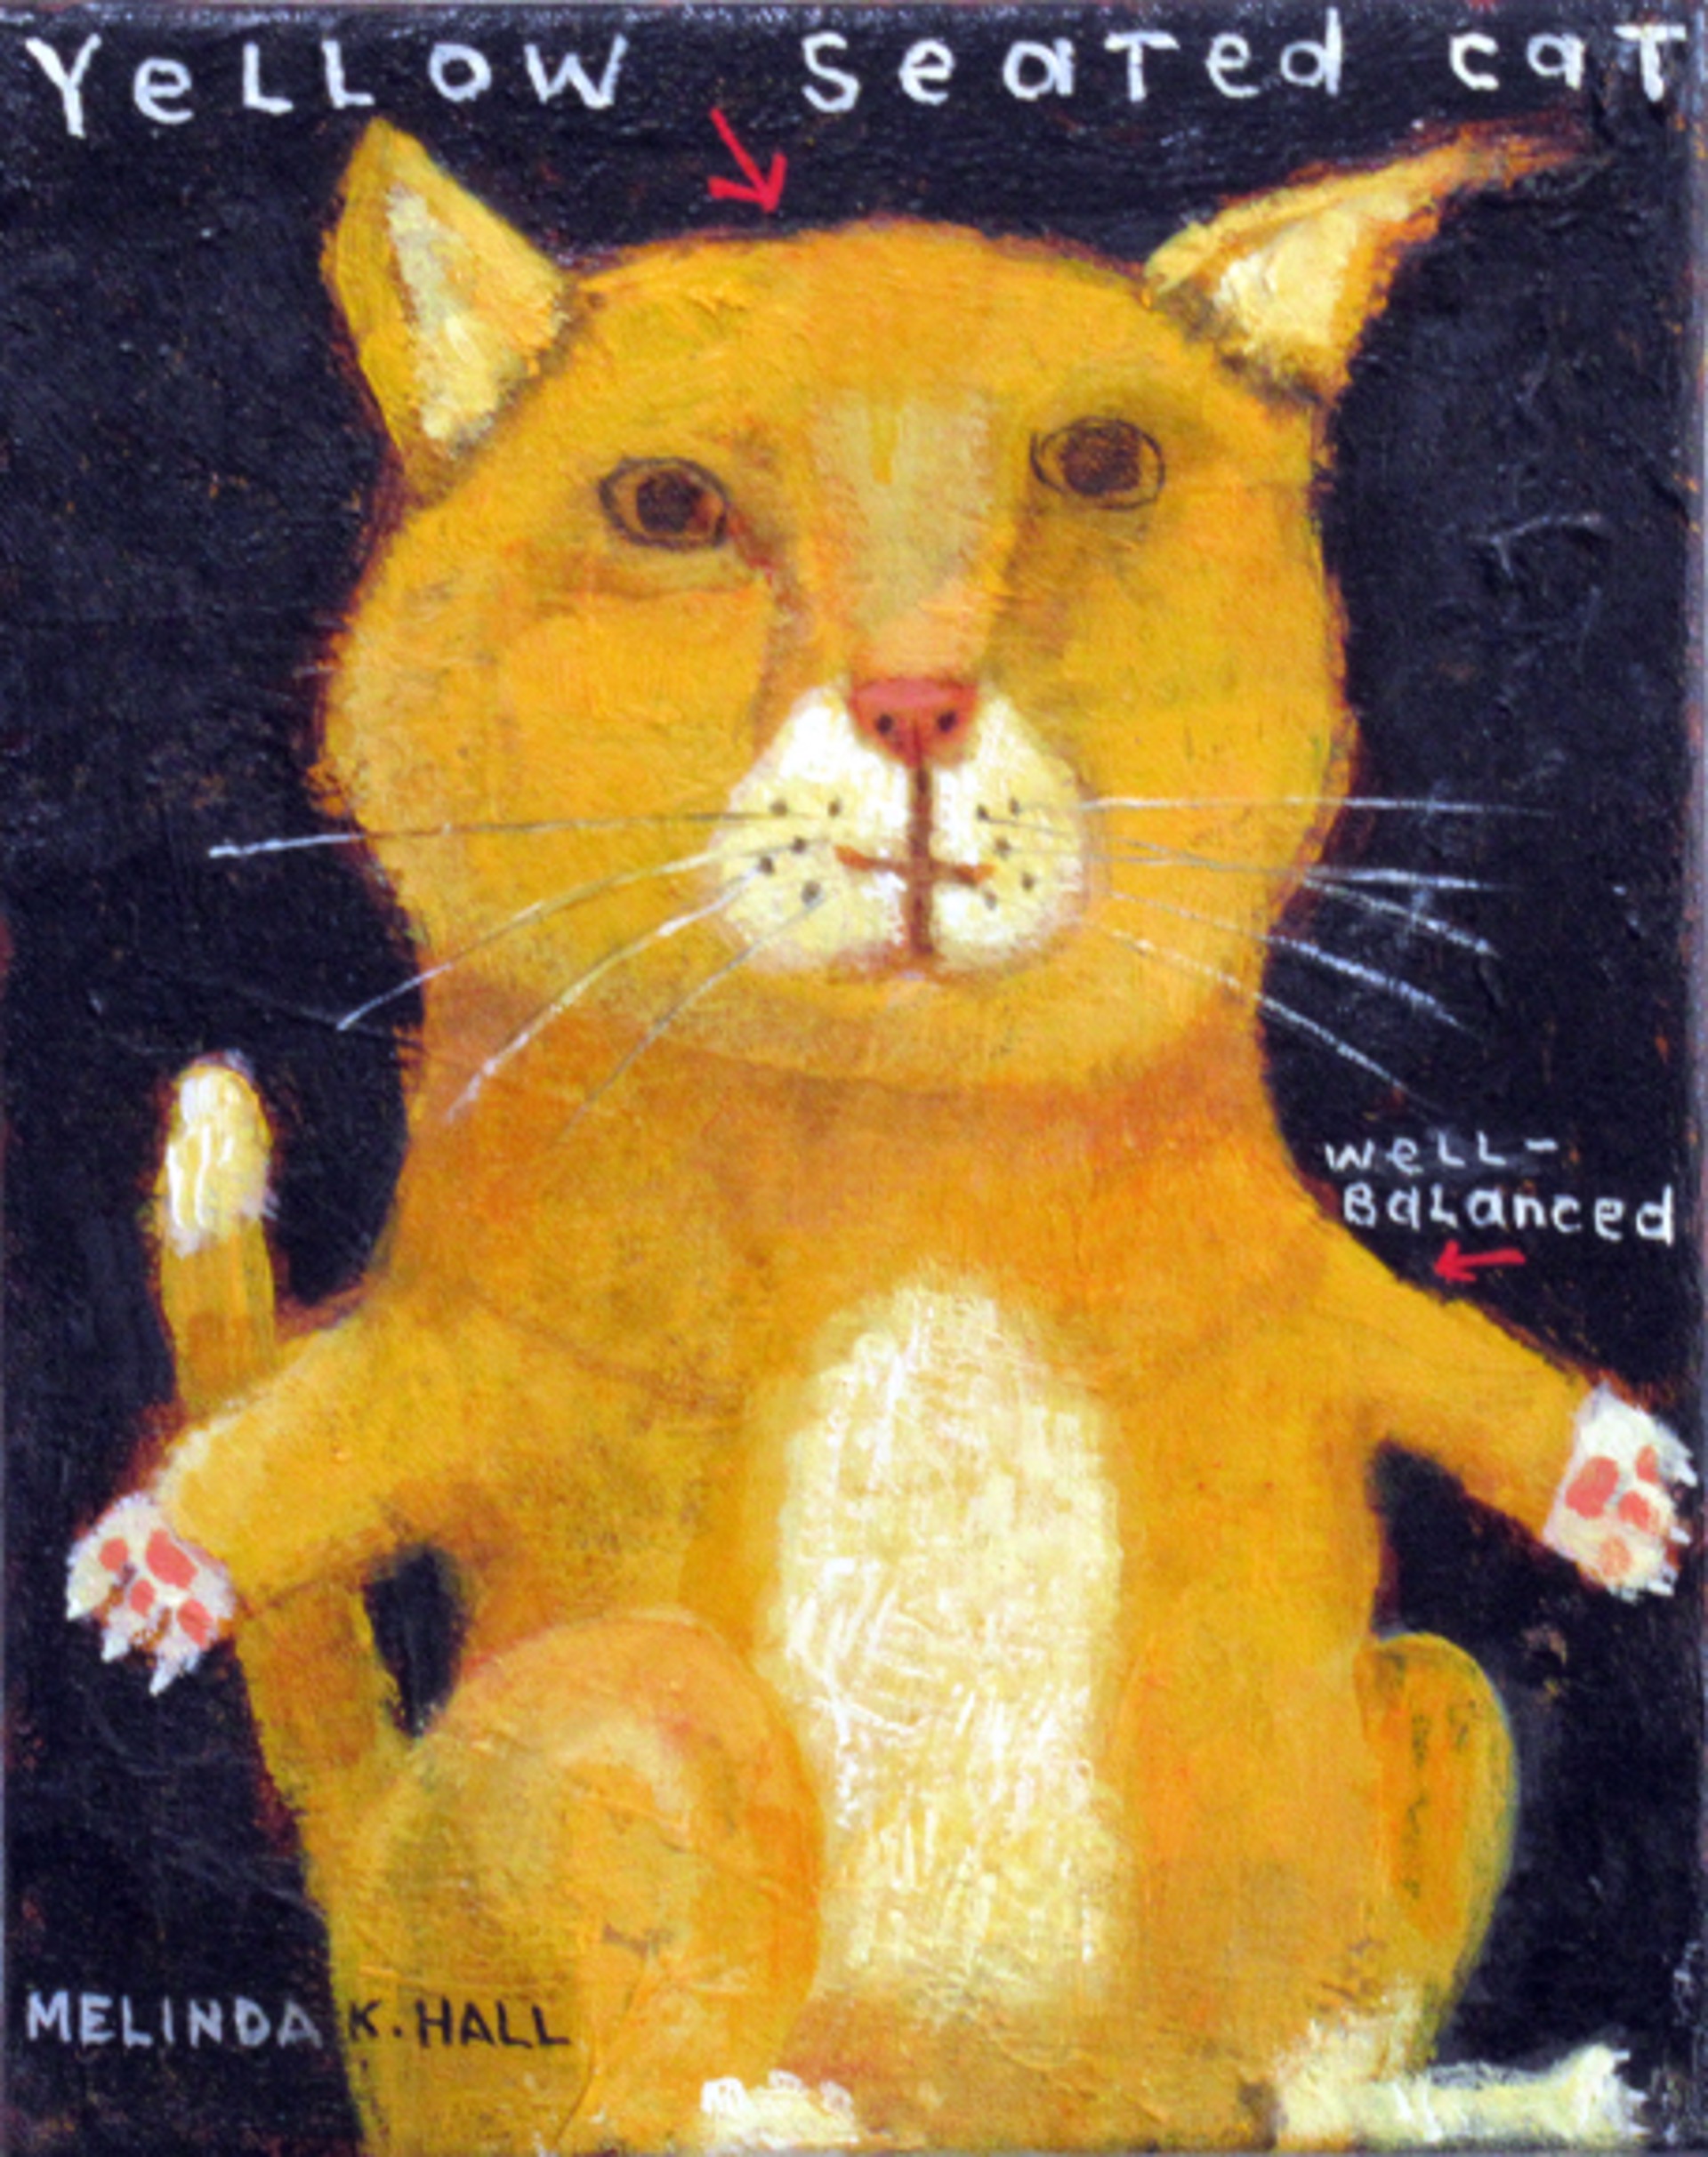 Yellow Seated Cat by Melinda K. Hall